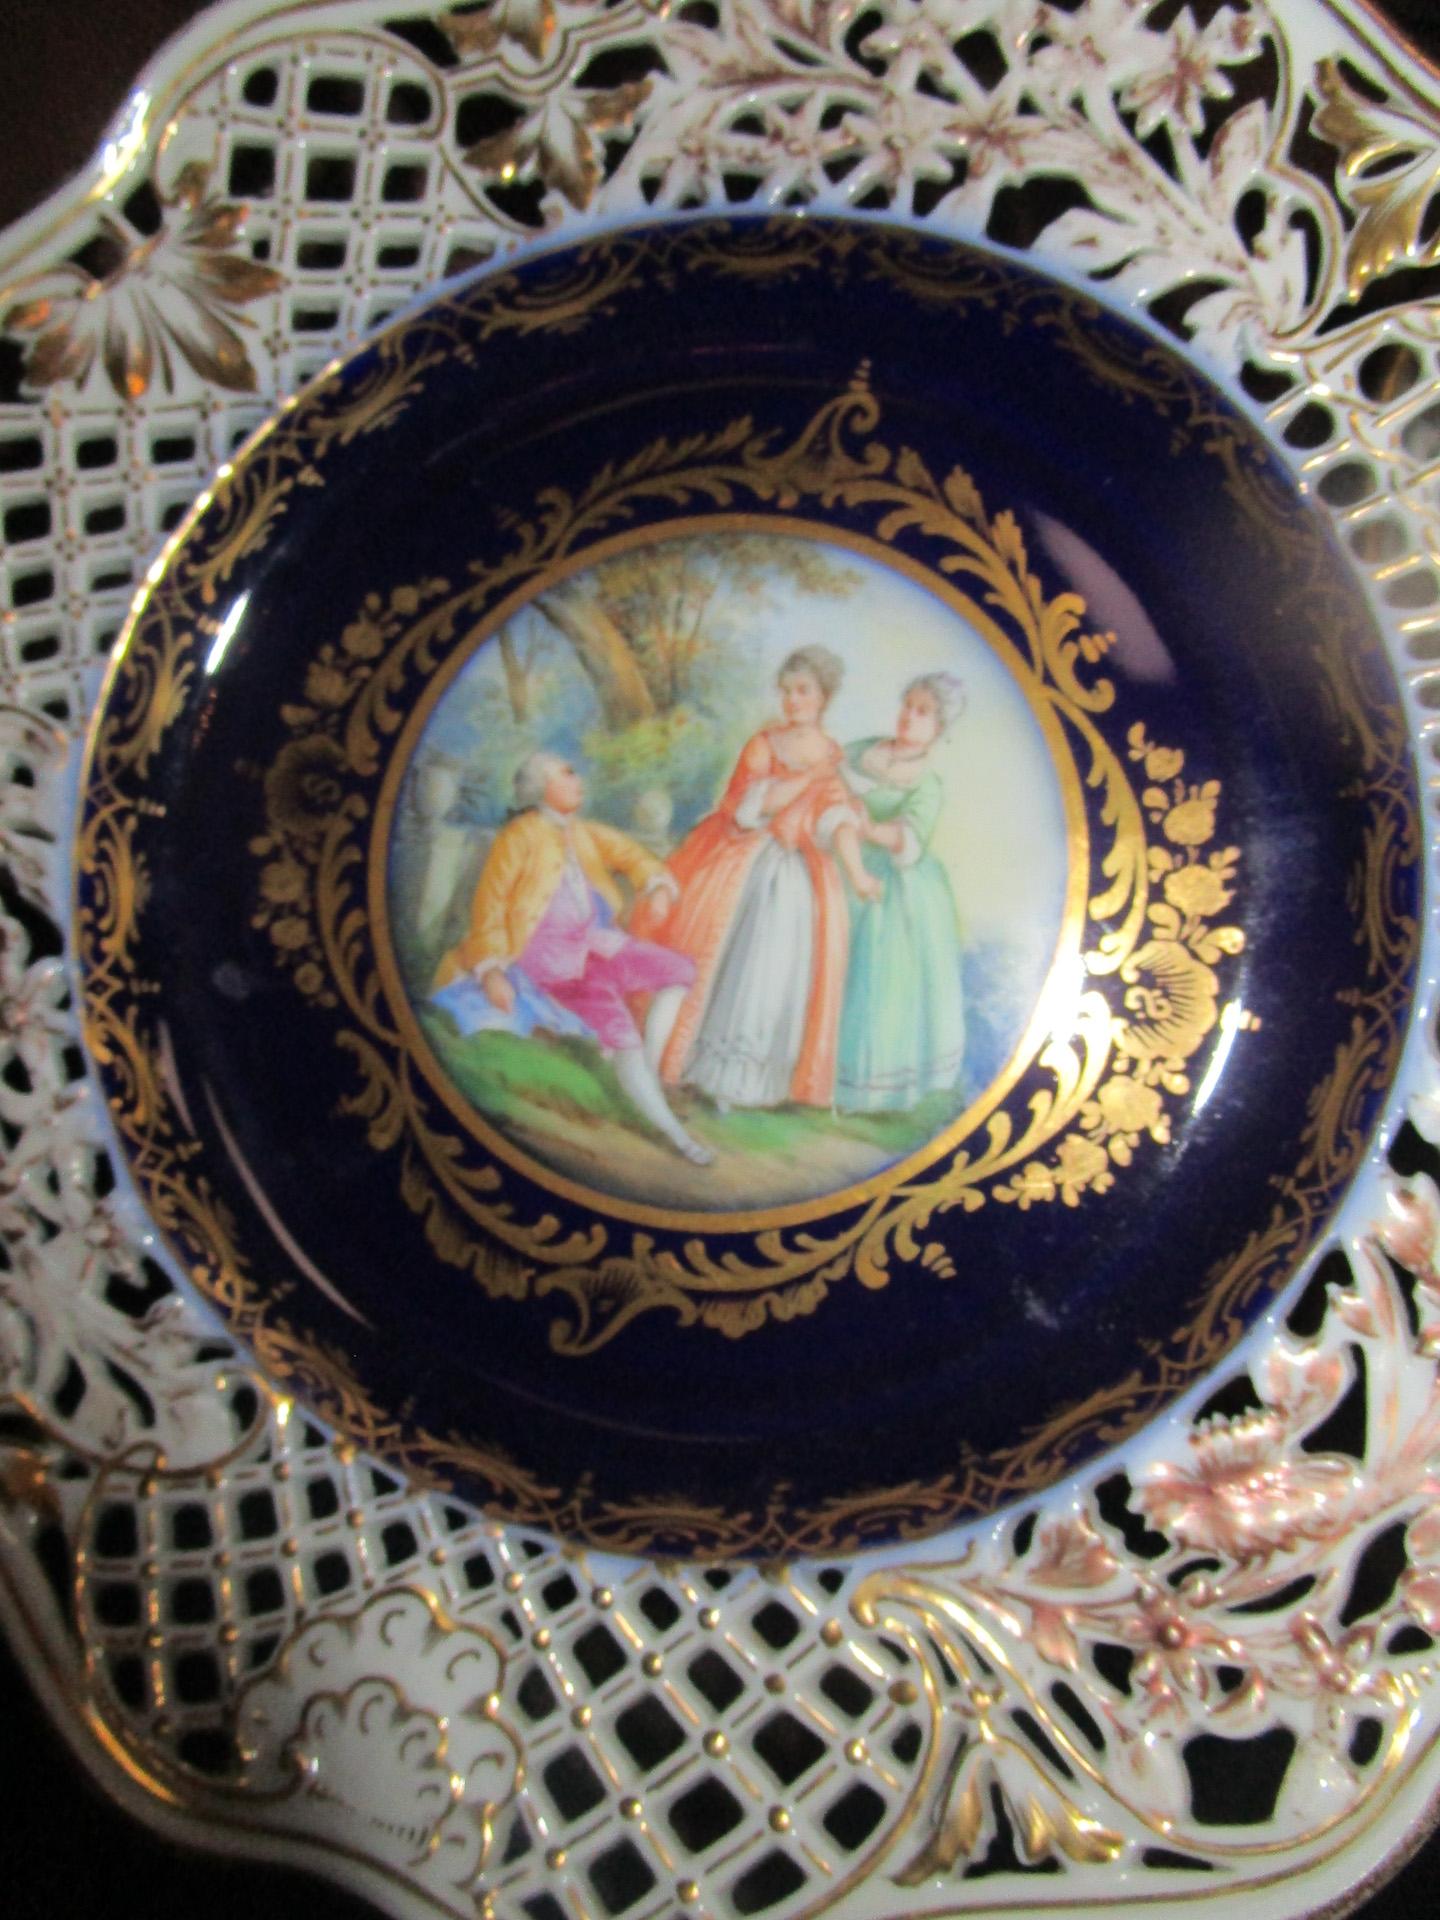 8 Meissen Germany 19thc Cobalt Reticulated Porcelain Plates with Courting Scenes For Sale 3